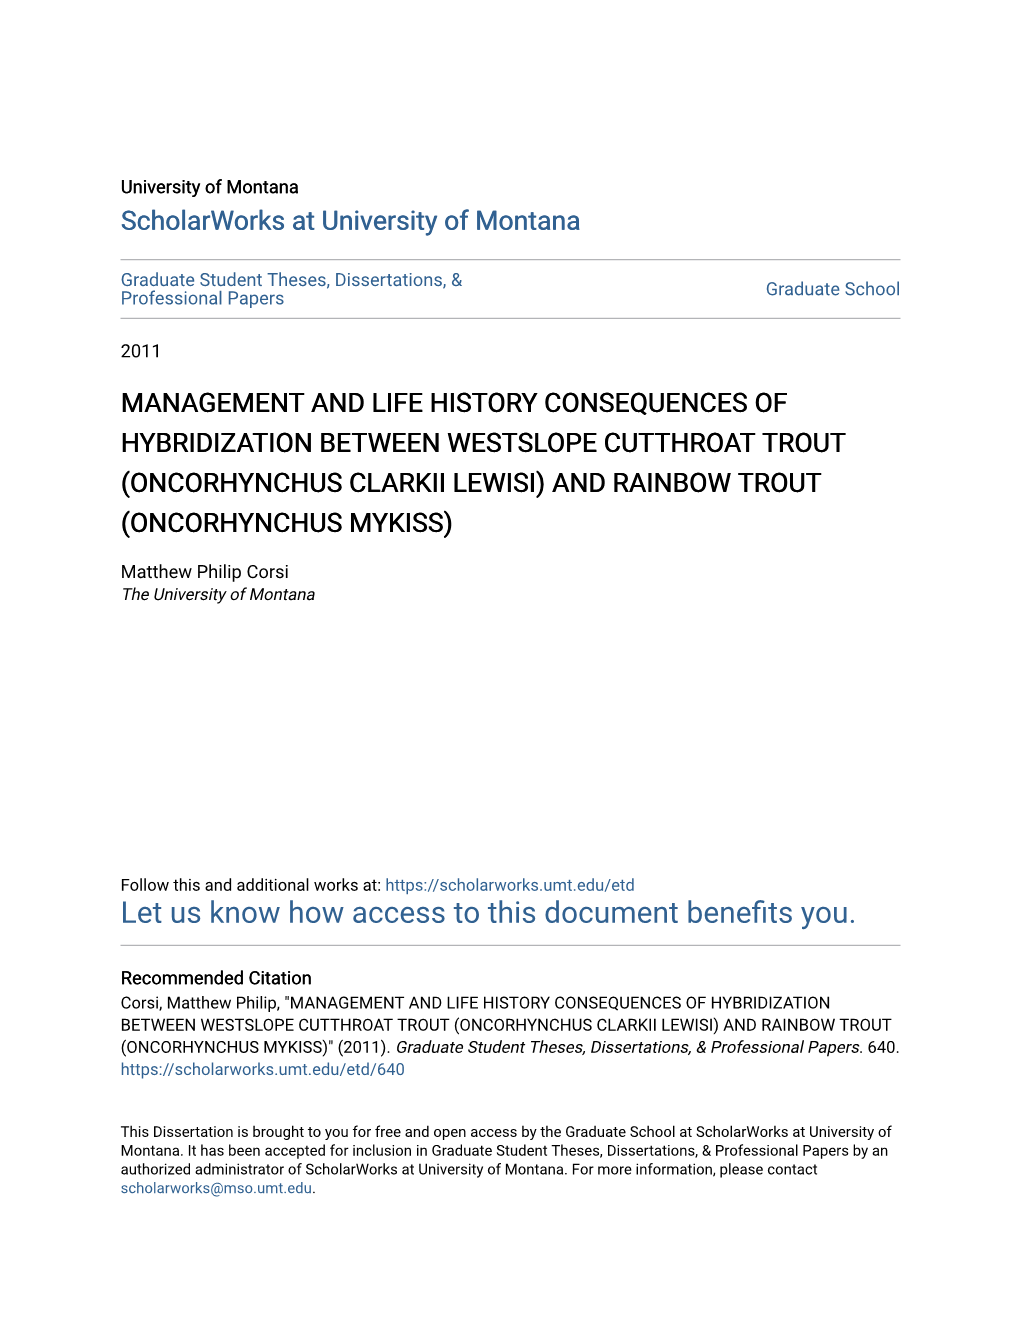 Management and Life History Consequences of Hybridization Between Westslope Cutthroat Trout (Oncorhynchus Clarkii Lewisi) and Rainbow Trout (Oncorhynchus Mykiss)